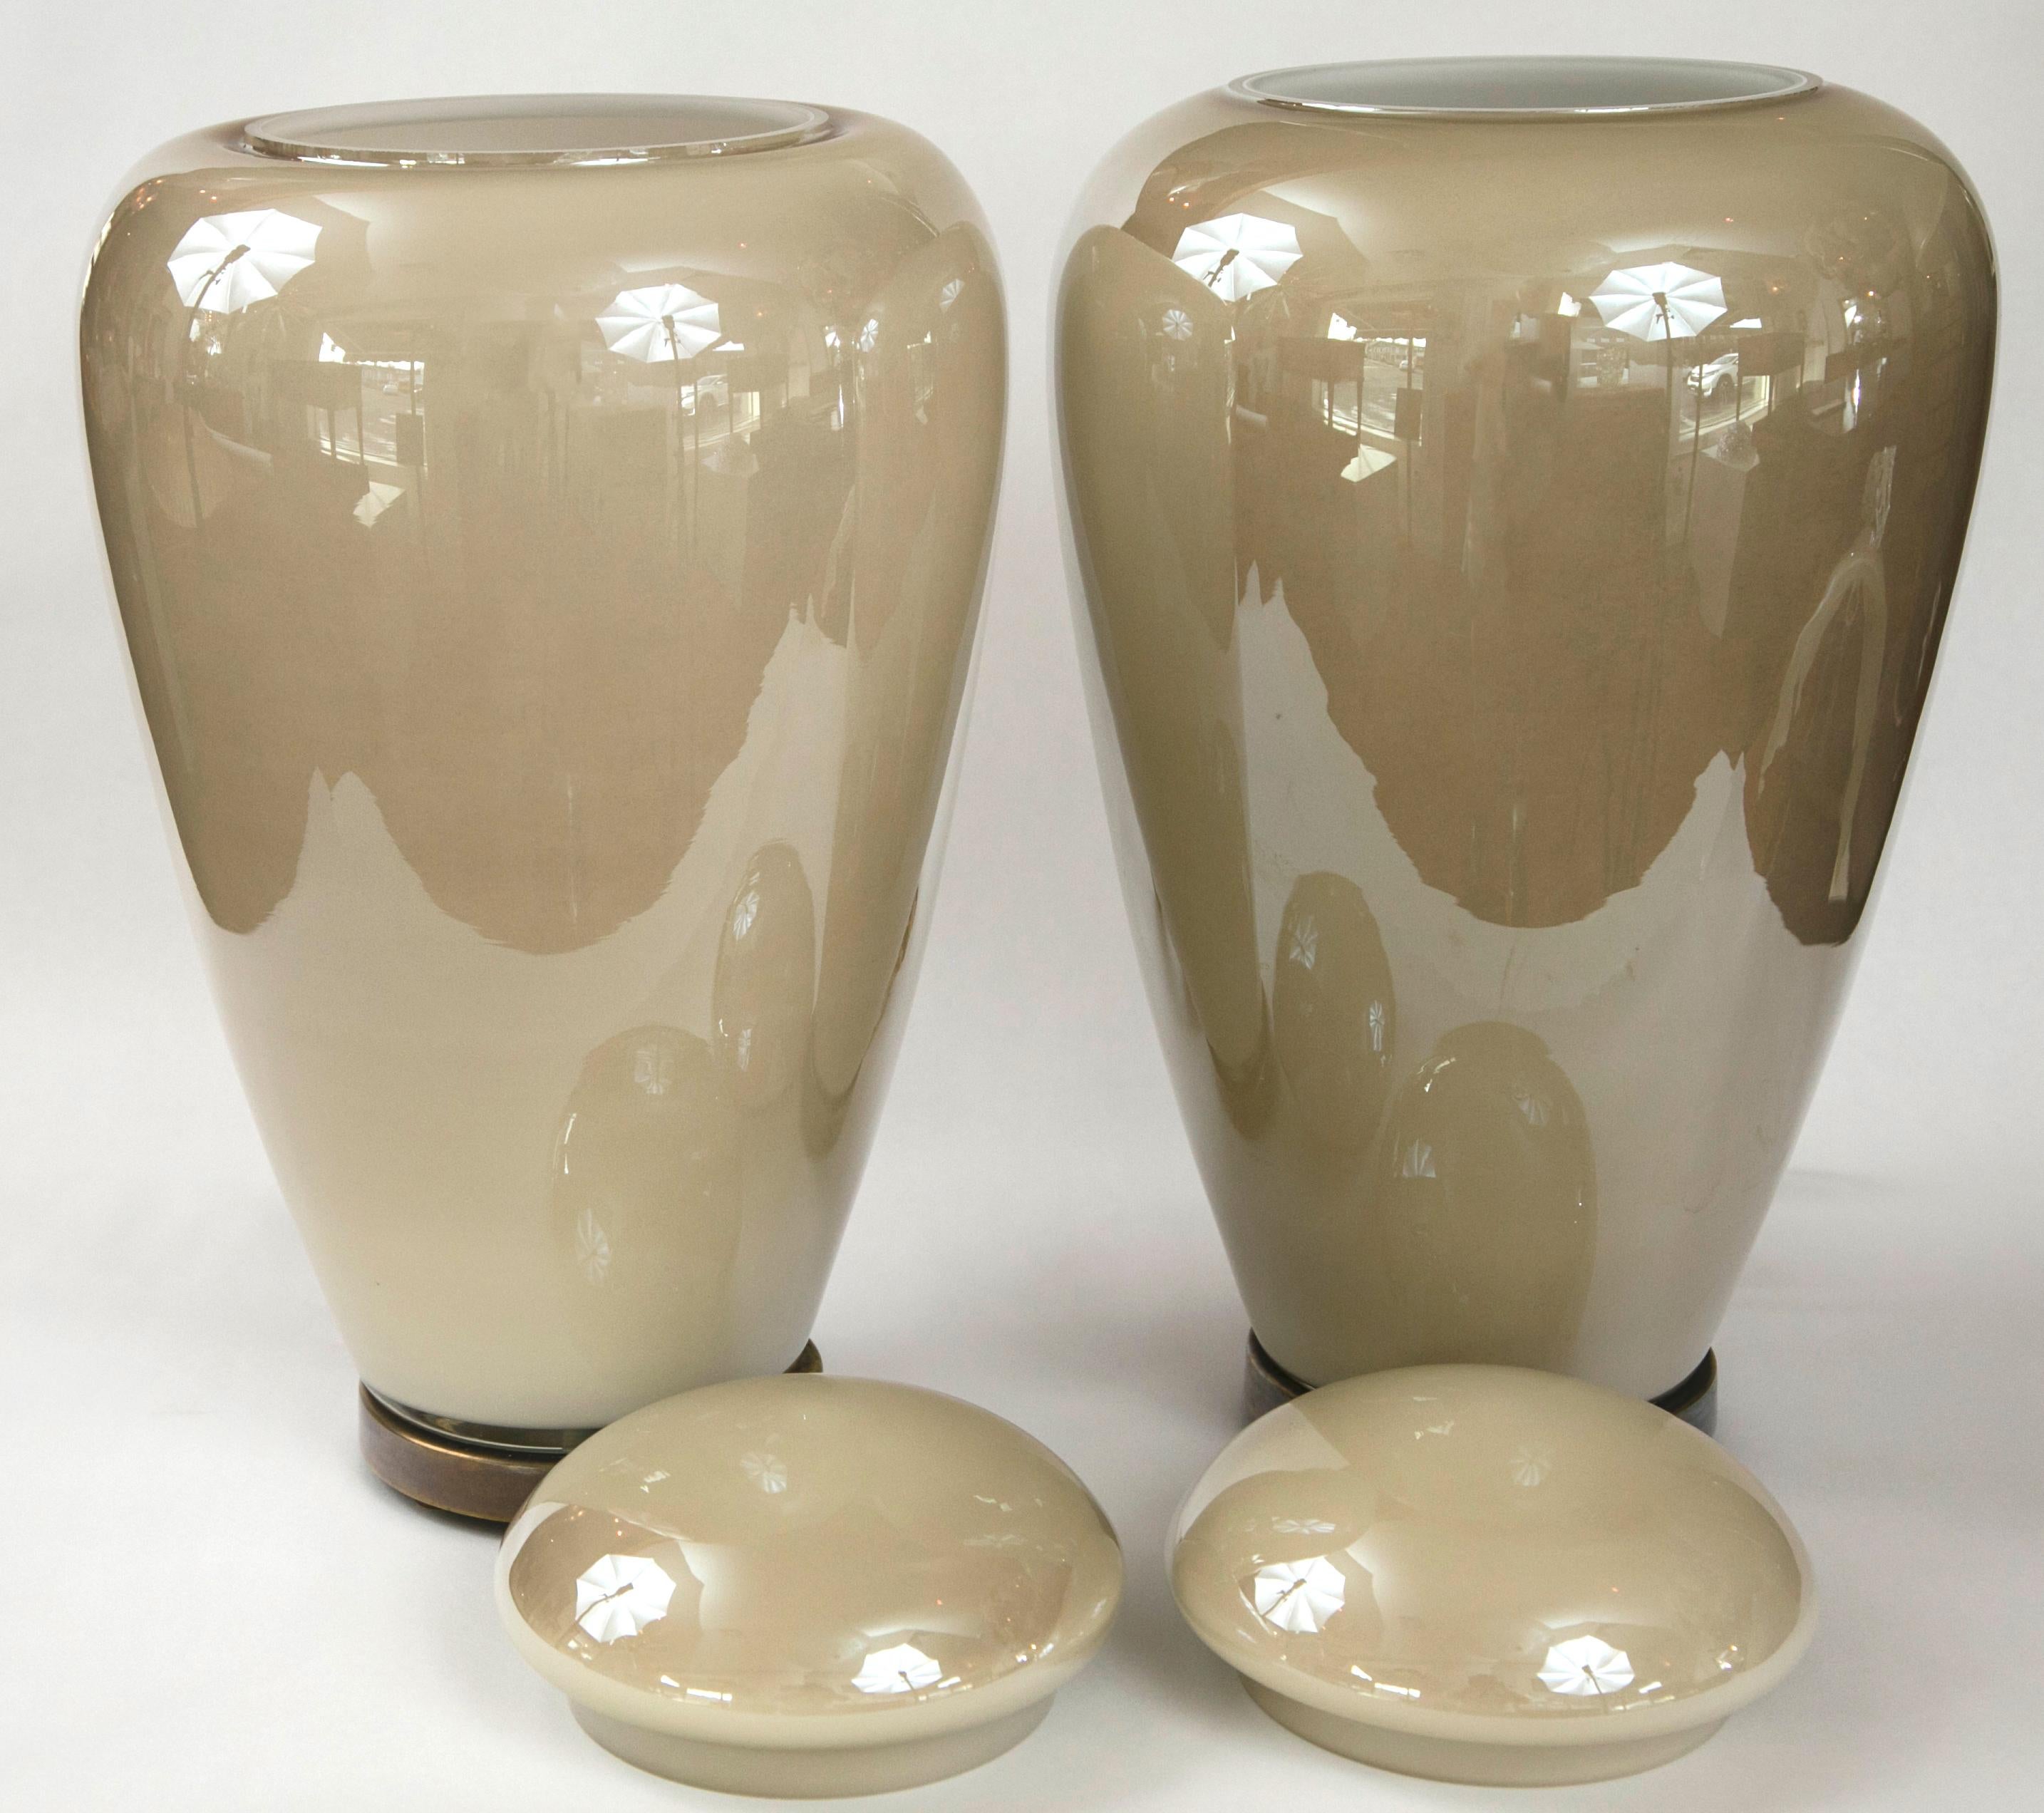 Pair of covered vases with brass bases in a silky soft toned creme/taupe  color
illuminated with one socket for up to 40 watts - for an amazing effect!
Origin: Venice, Italy
Dimensions of glass:
15 1/2